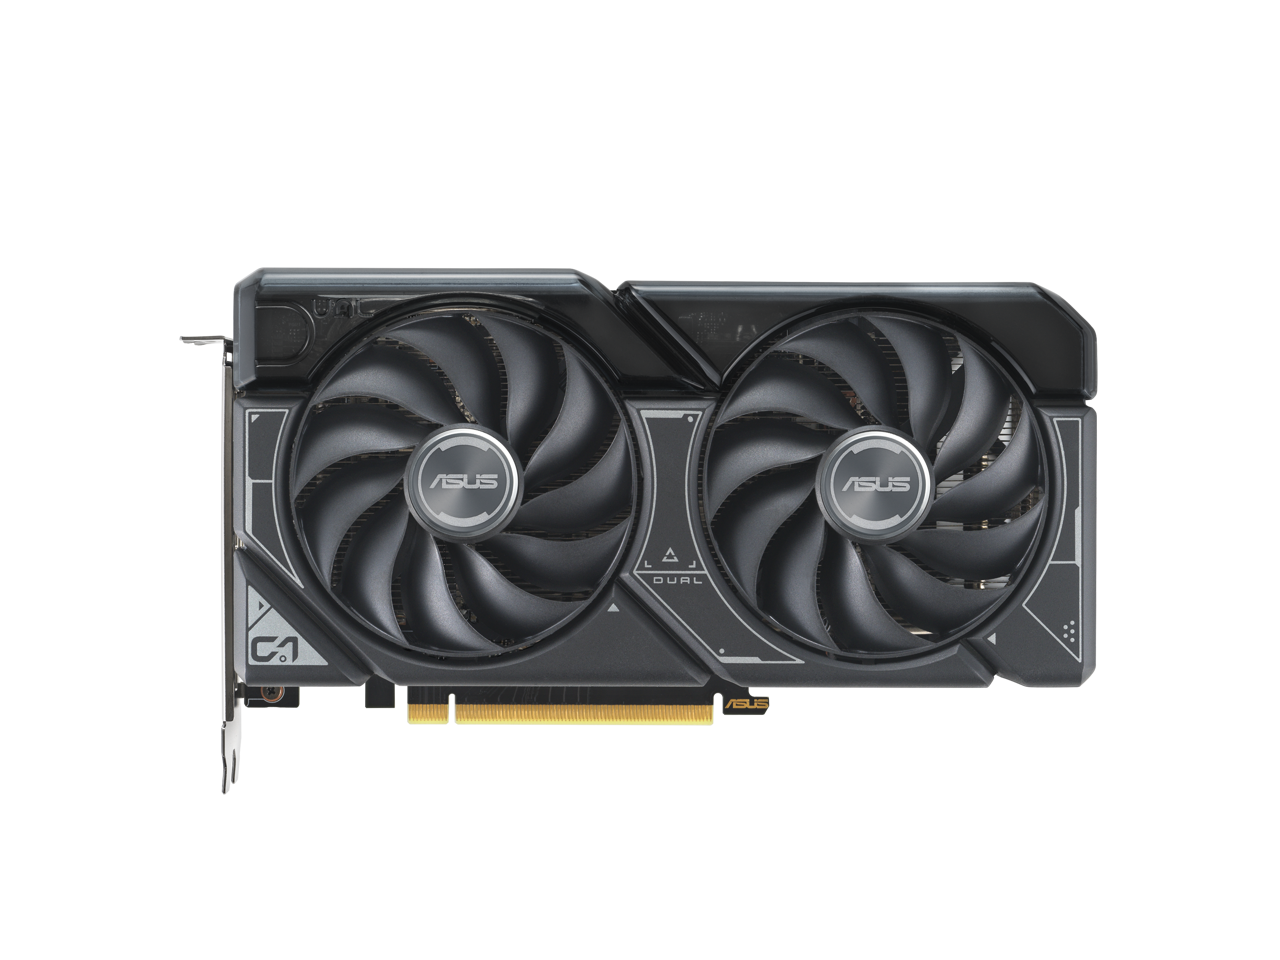 NVIDIA GeForce RTX 4060 is up to 18% faster than RTX 3060 in first leaked  benchmarks 